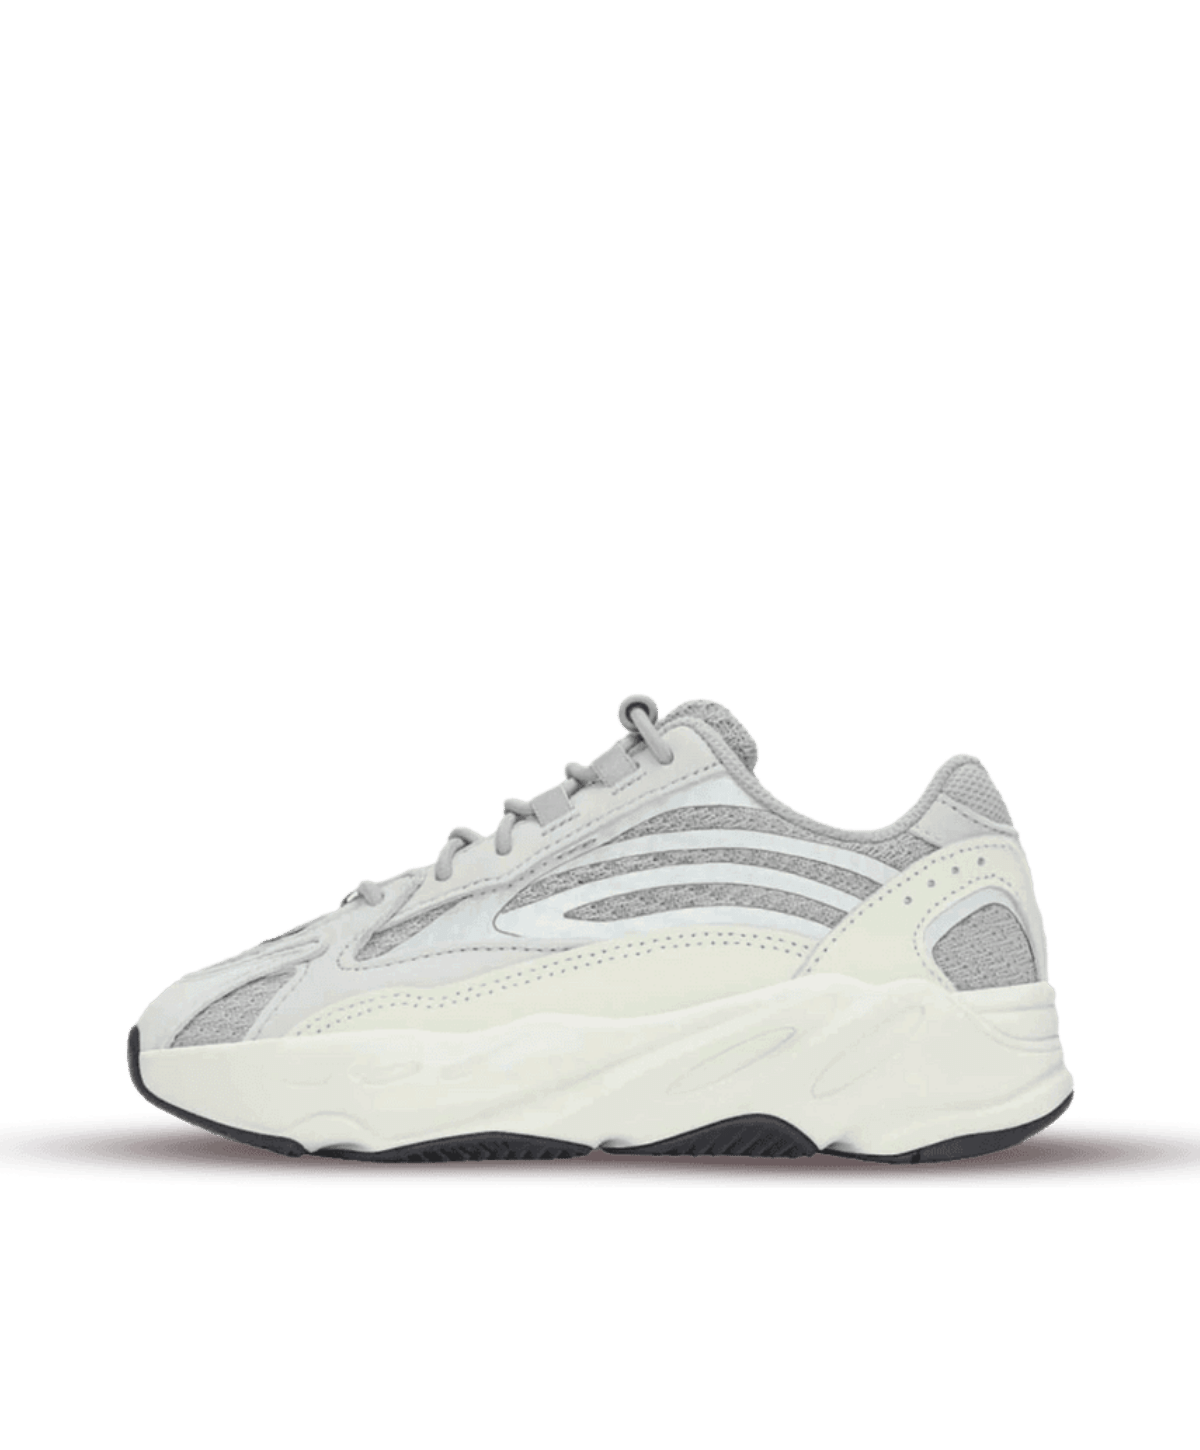 Adidas Yeezy Boost 700 V2 Kids 'Static' SIDE VIEW